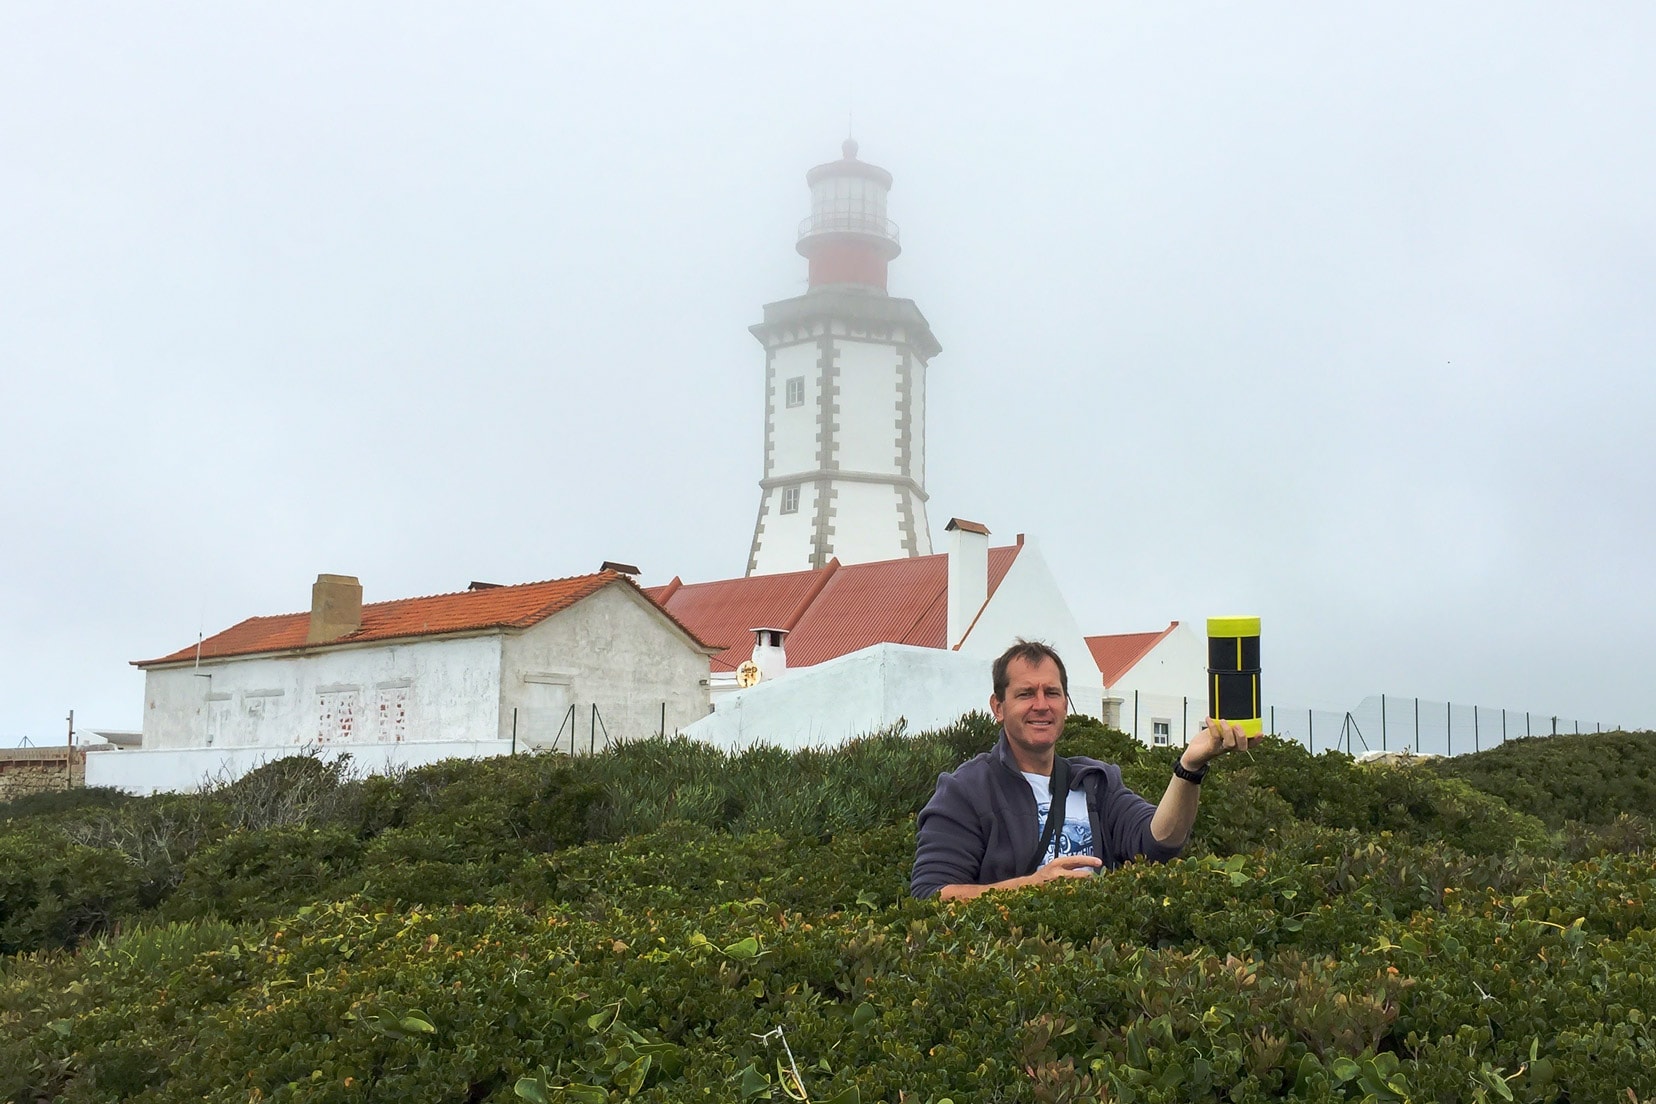 geocaching in the scrub with lighthouse  in a foggy background